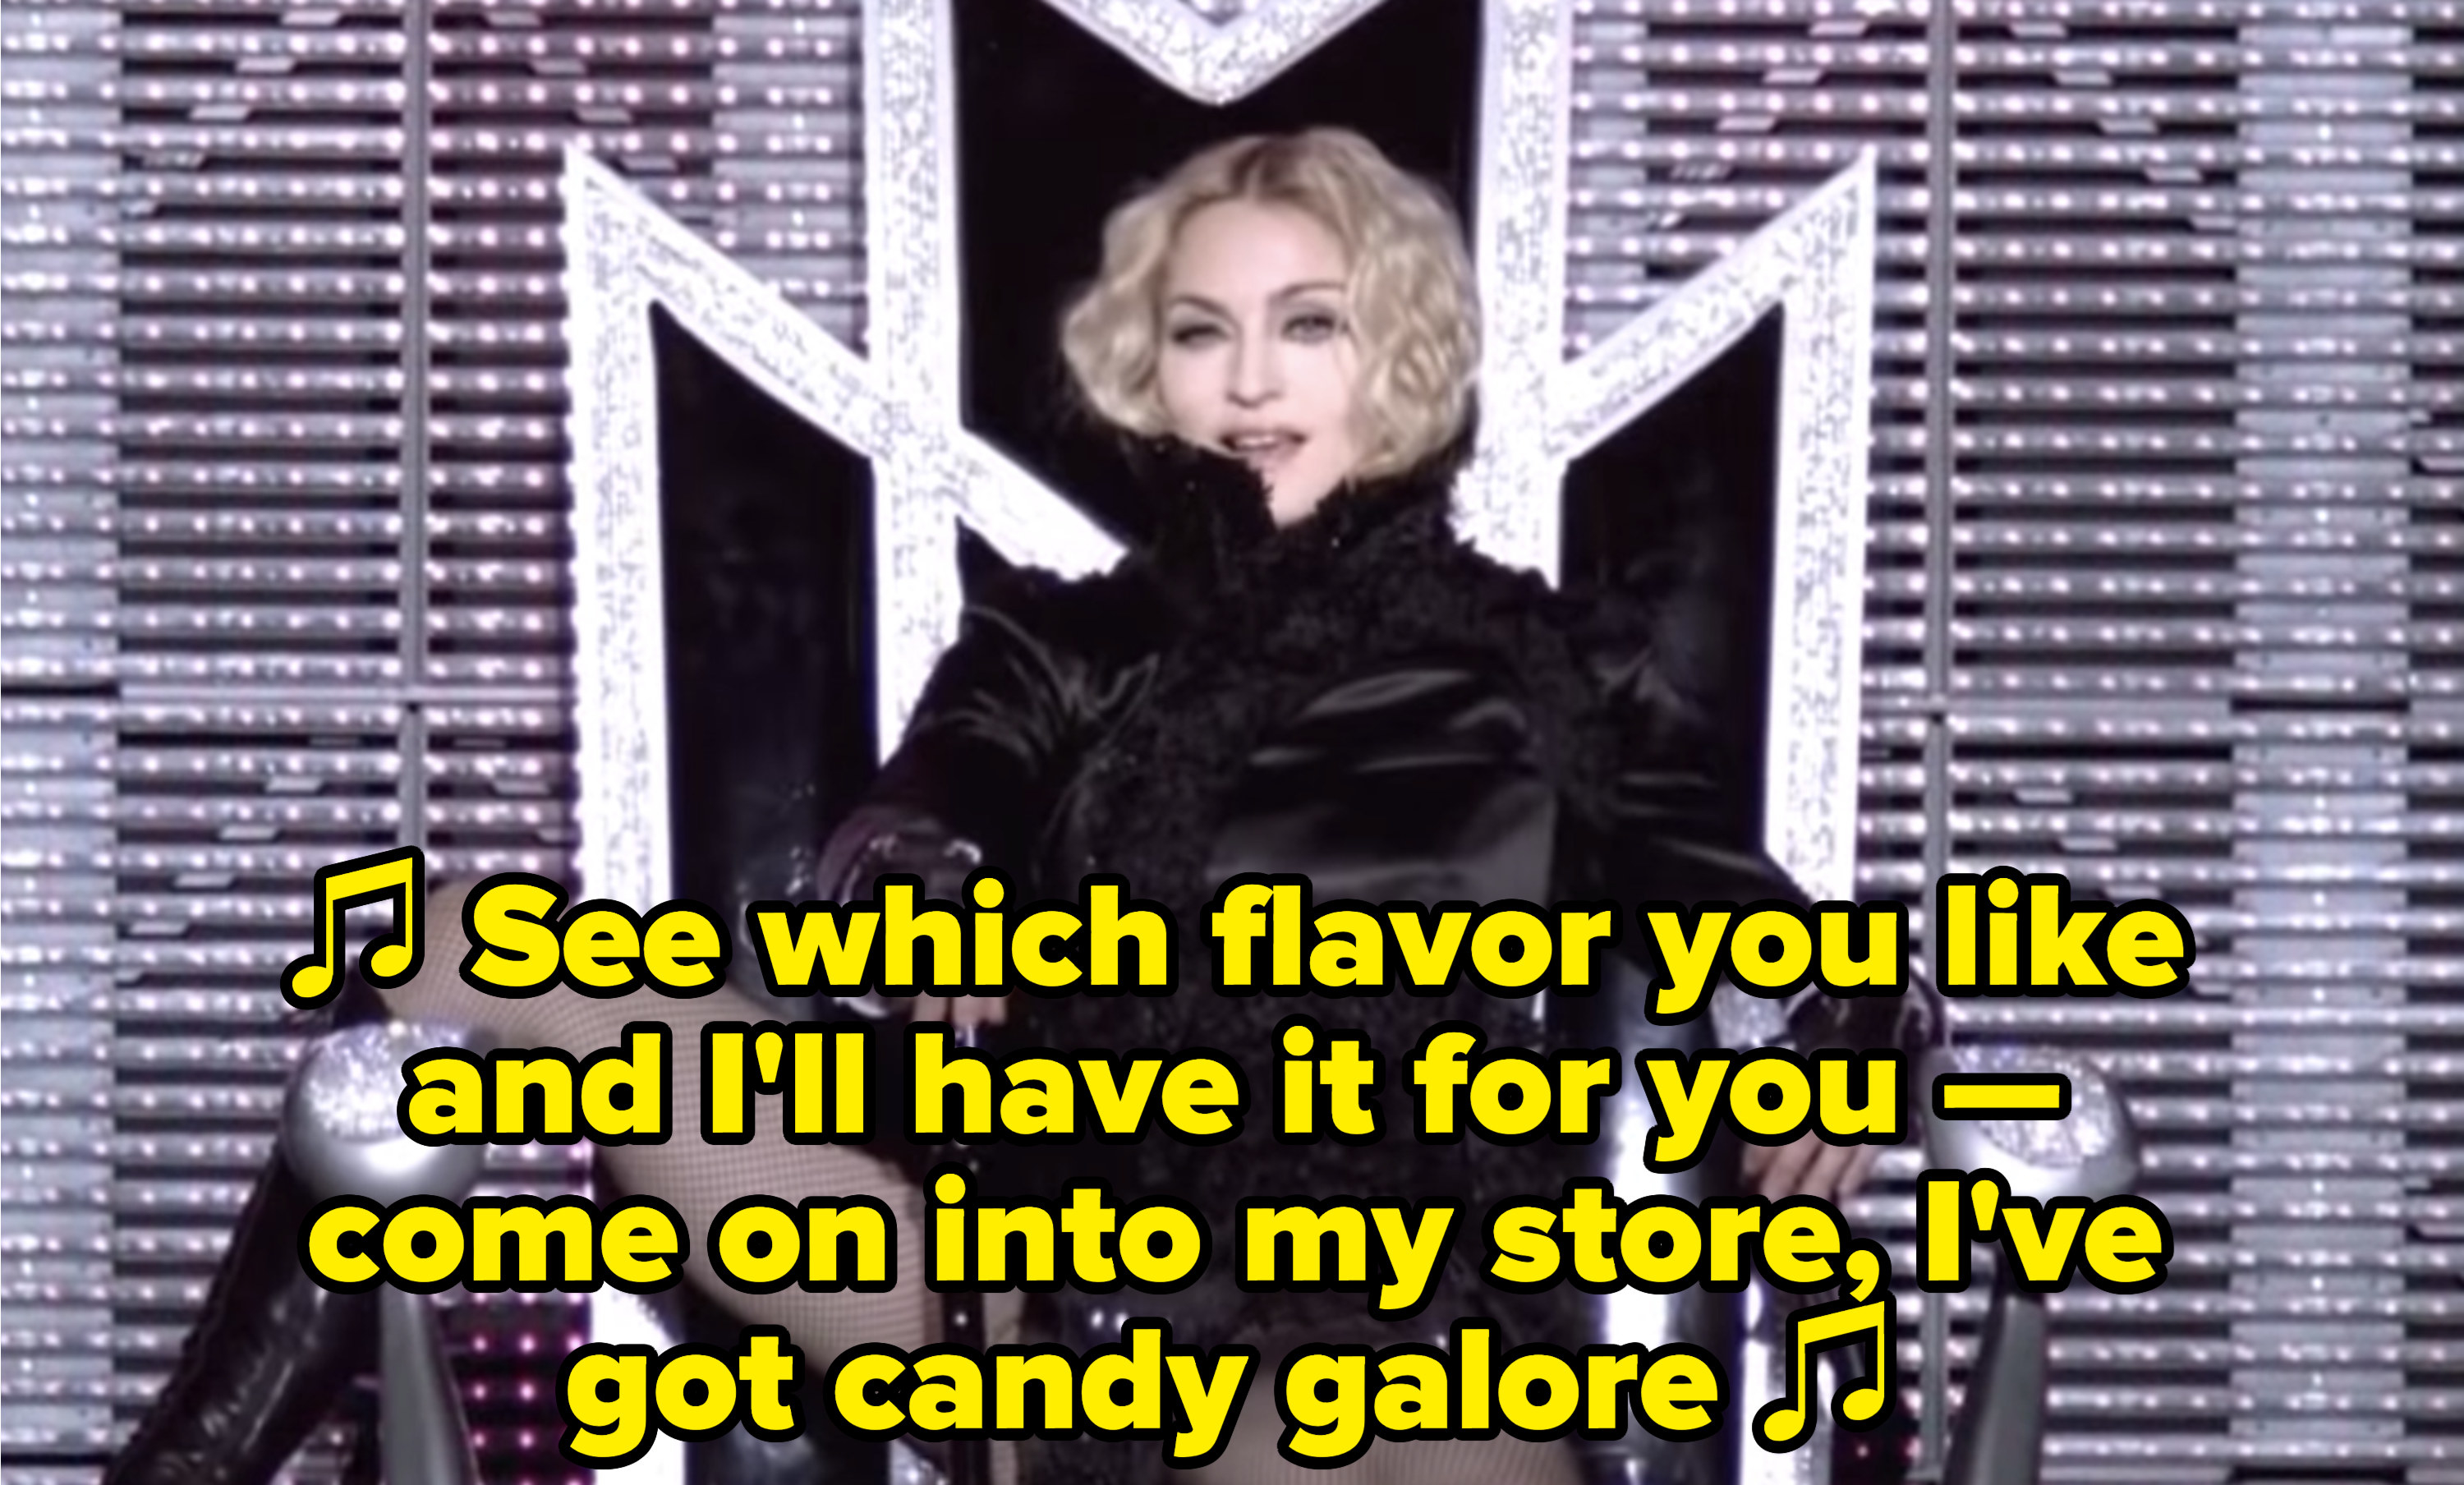 Madonna performing &quot;Candy Shop&quot; in concert: &quot;See which flavor you like and I&#x27;ll have it for you — come on into my store, I&#x27;ve got candy galore&quot;